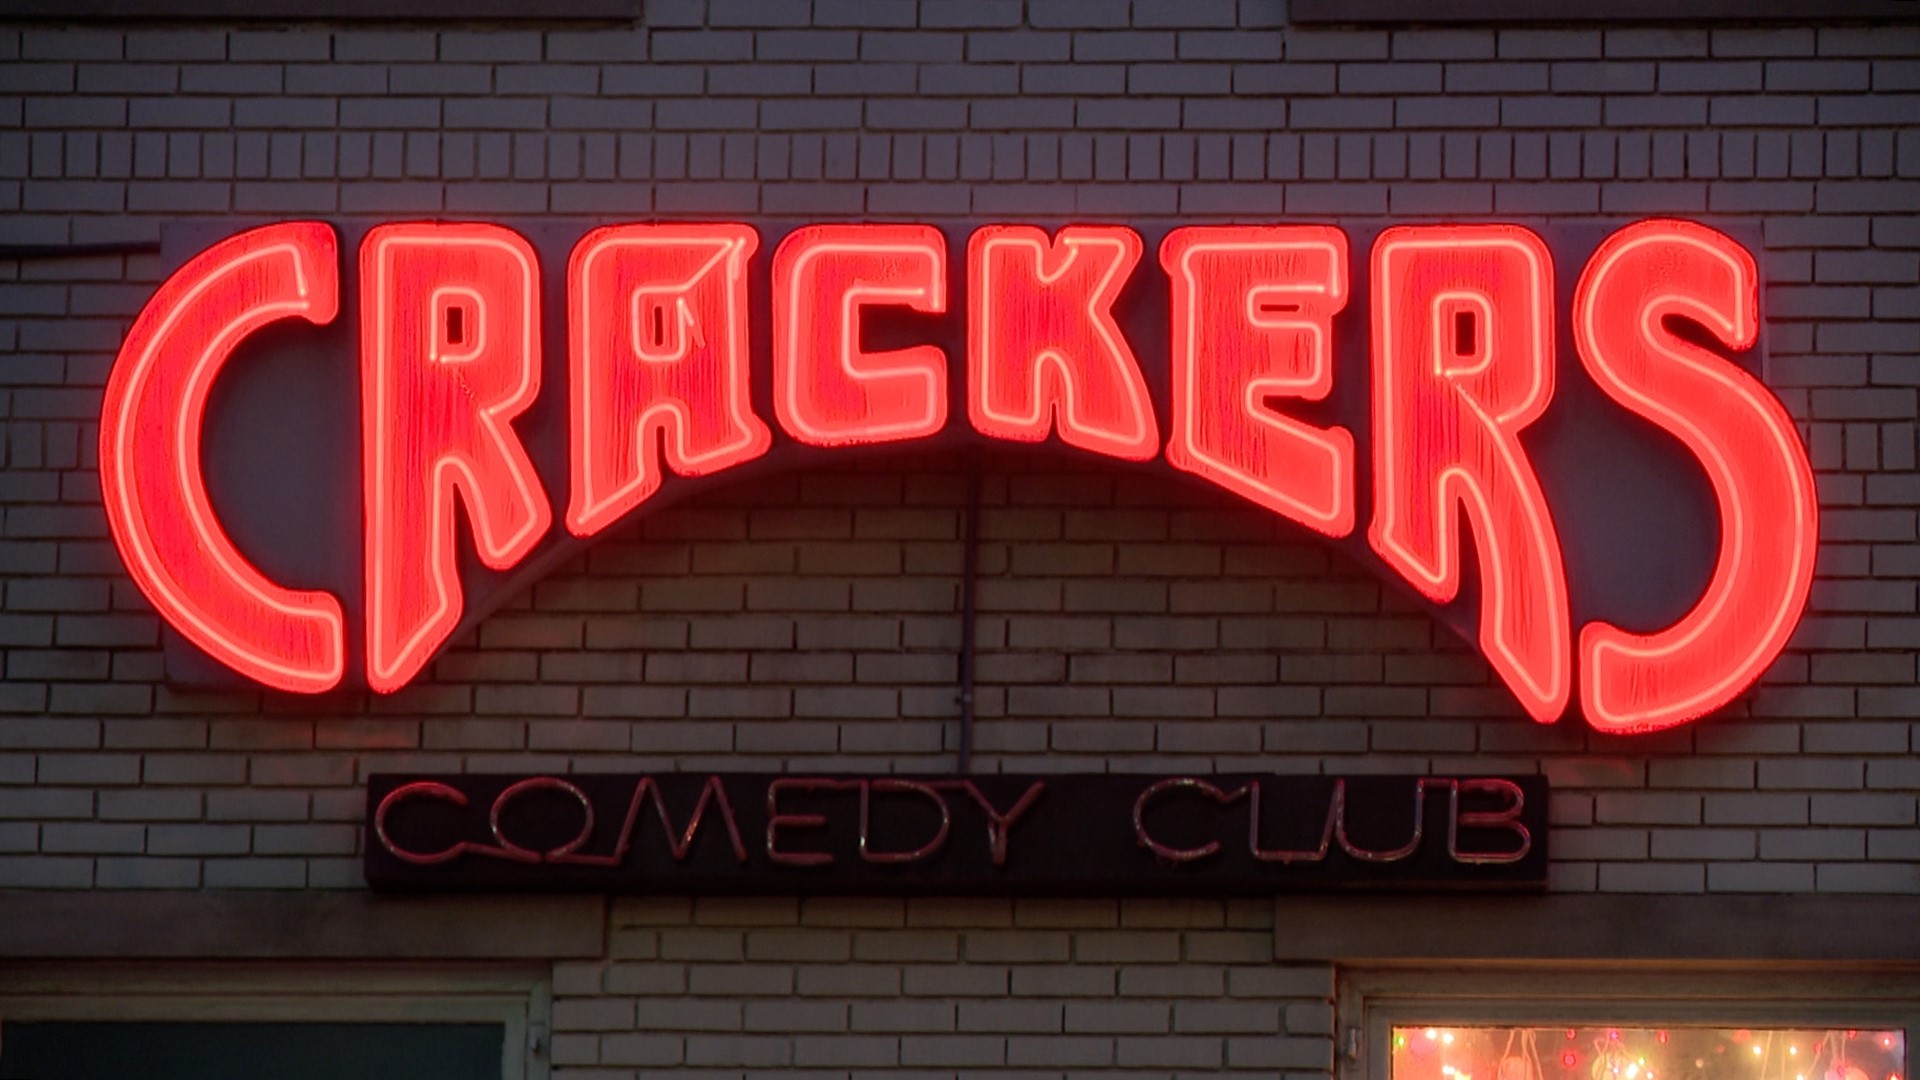 On Monday, both the Crackers Comedy Club owner and the building owner came together and worked out a deal.